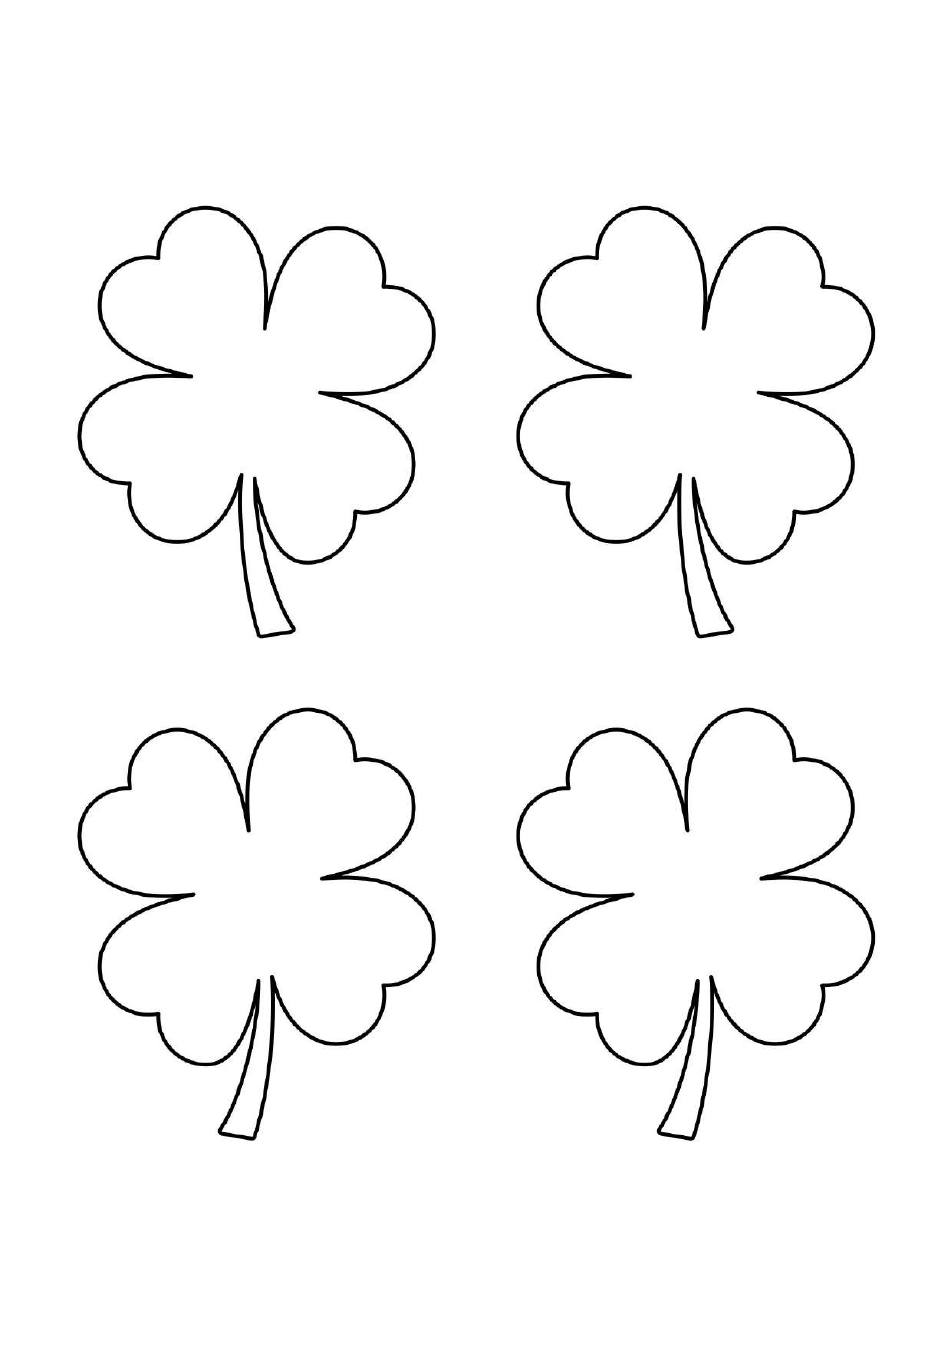 Shamrock Template - An image preview displaying a four-leaf clover-shaped template with four white shamrocks laid out symmetrically.